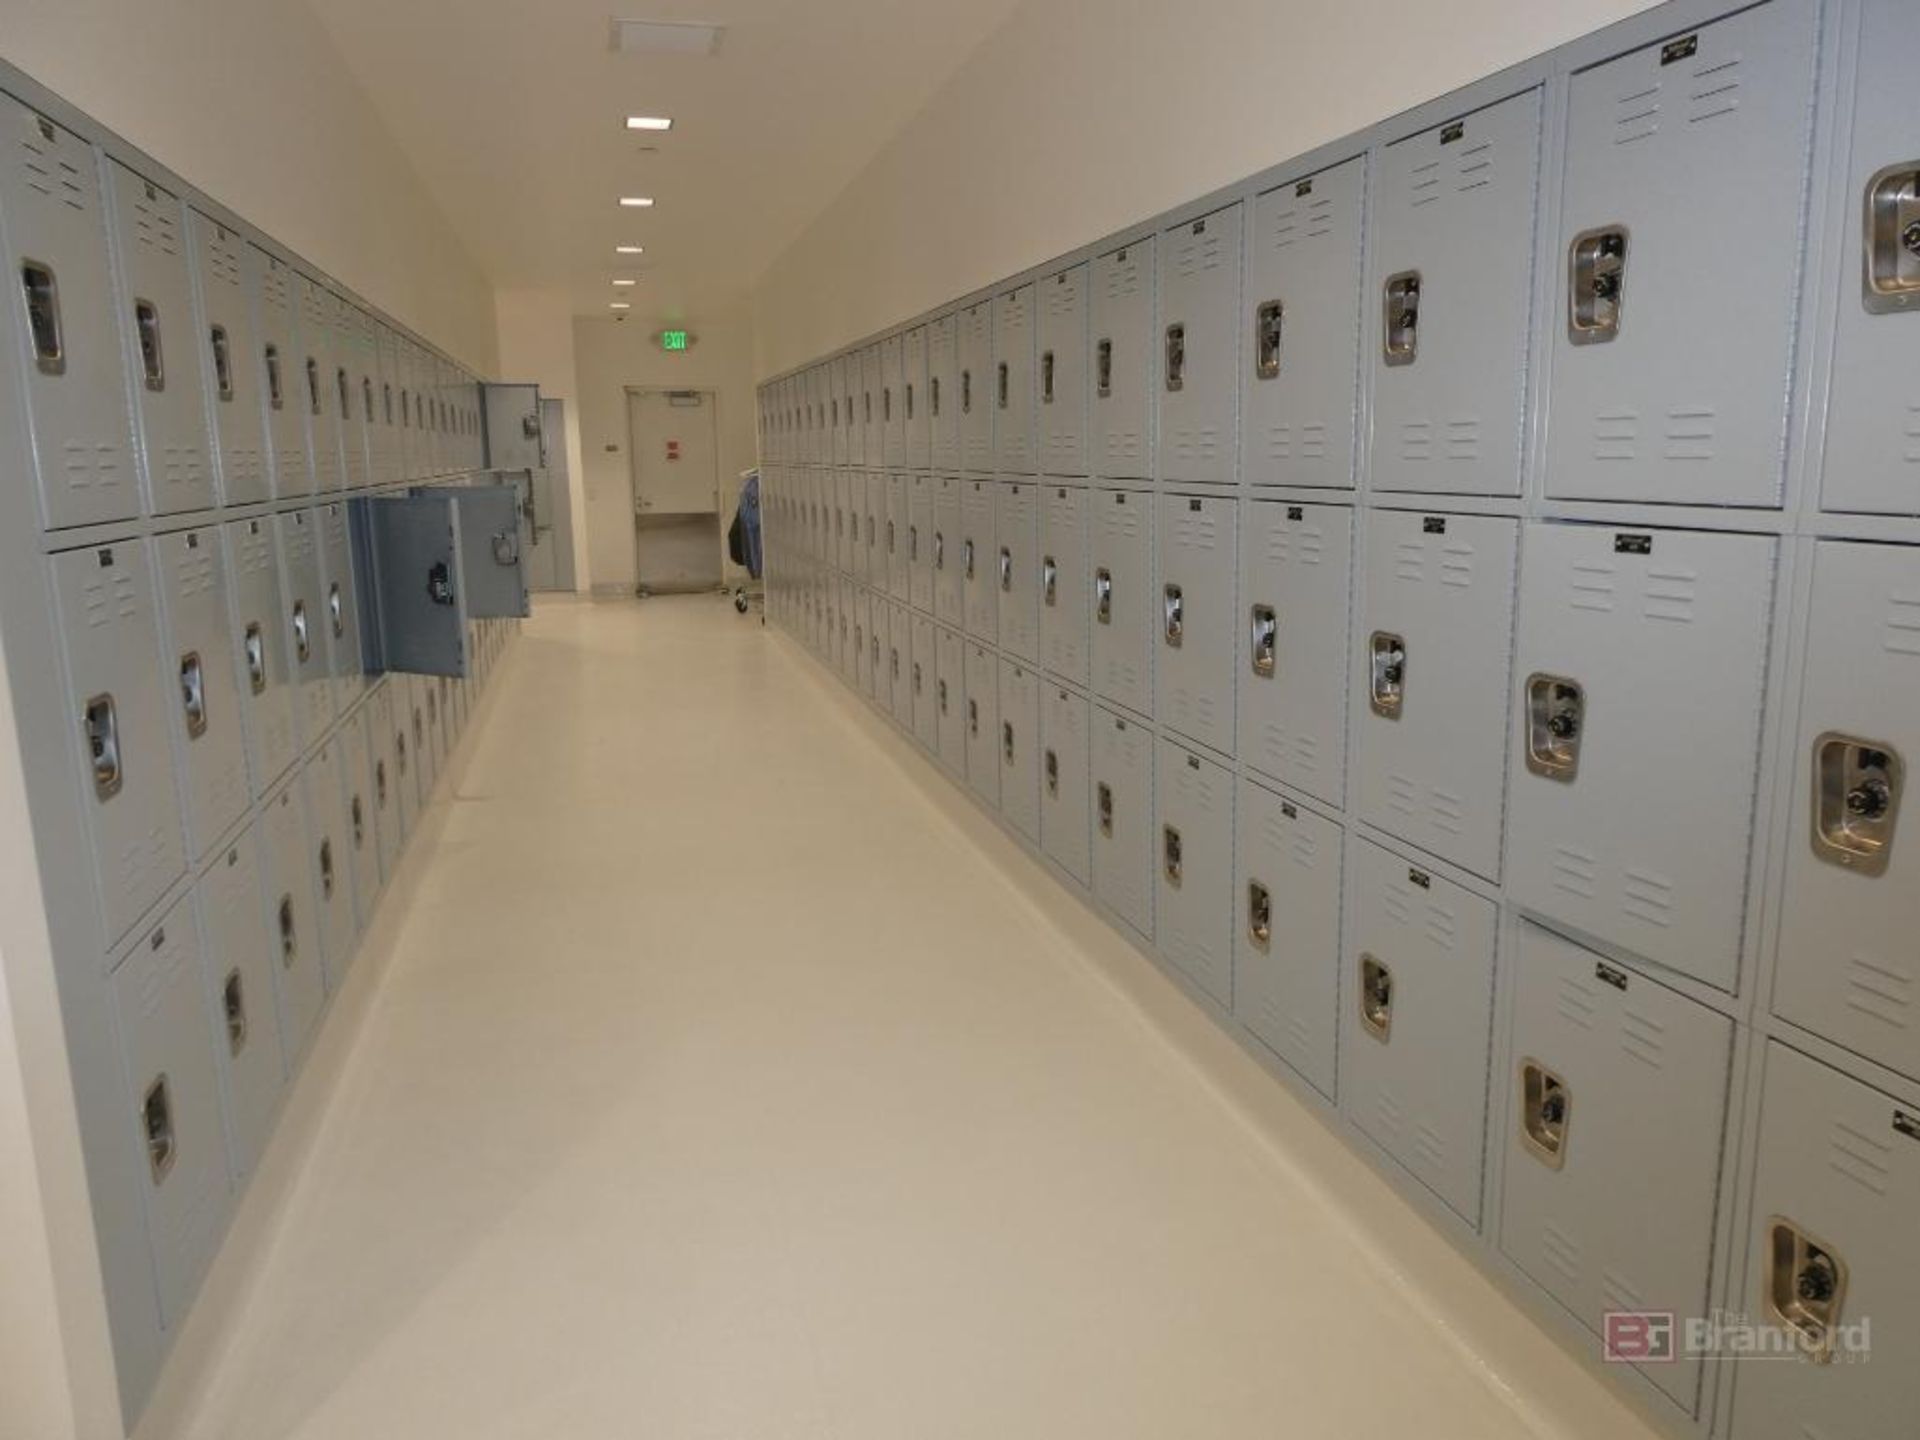 (612) Hallowell Lockers w/ Built-In Combination Lock - Image 6 of 6